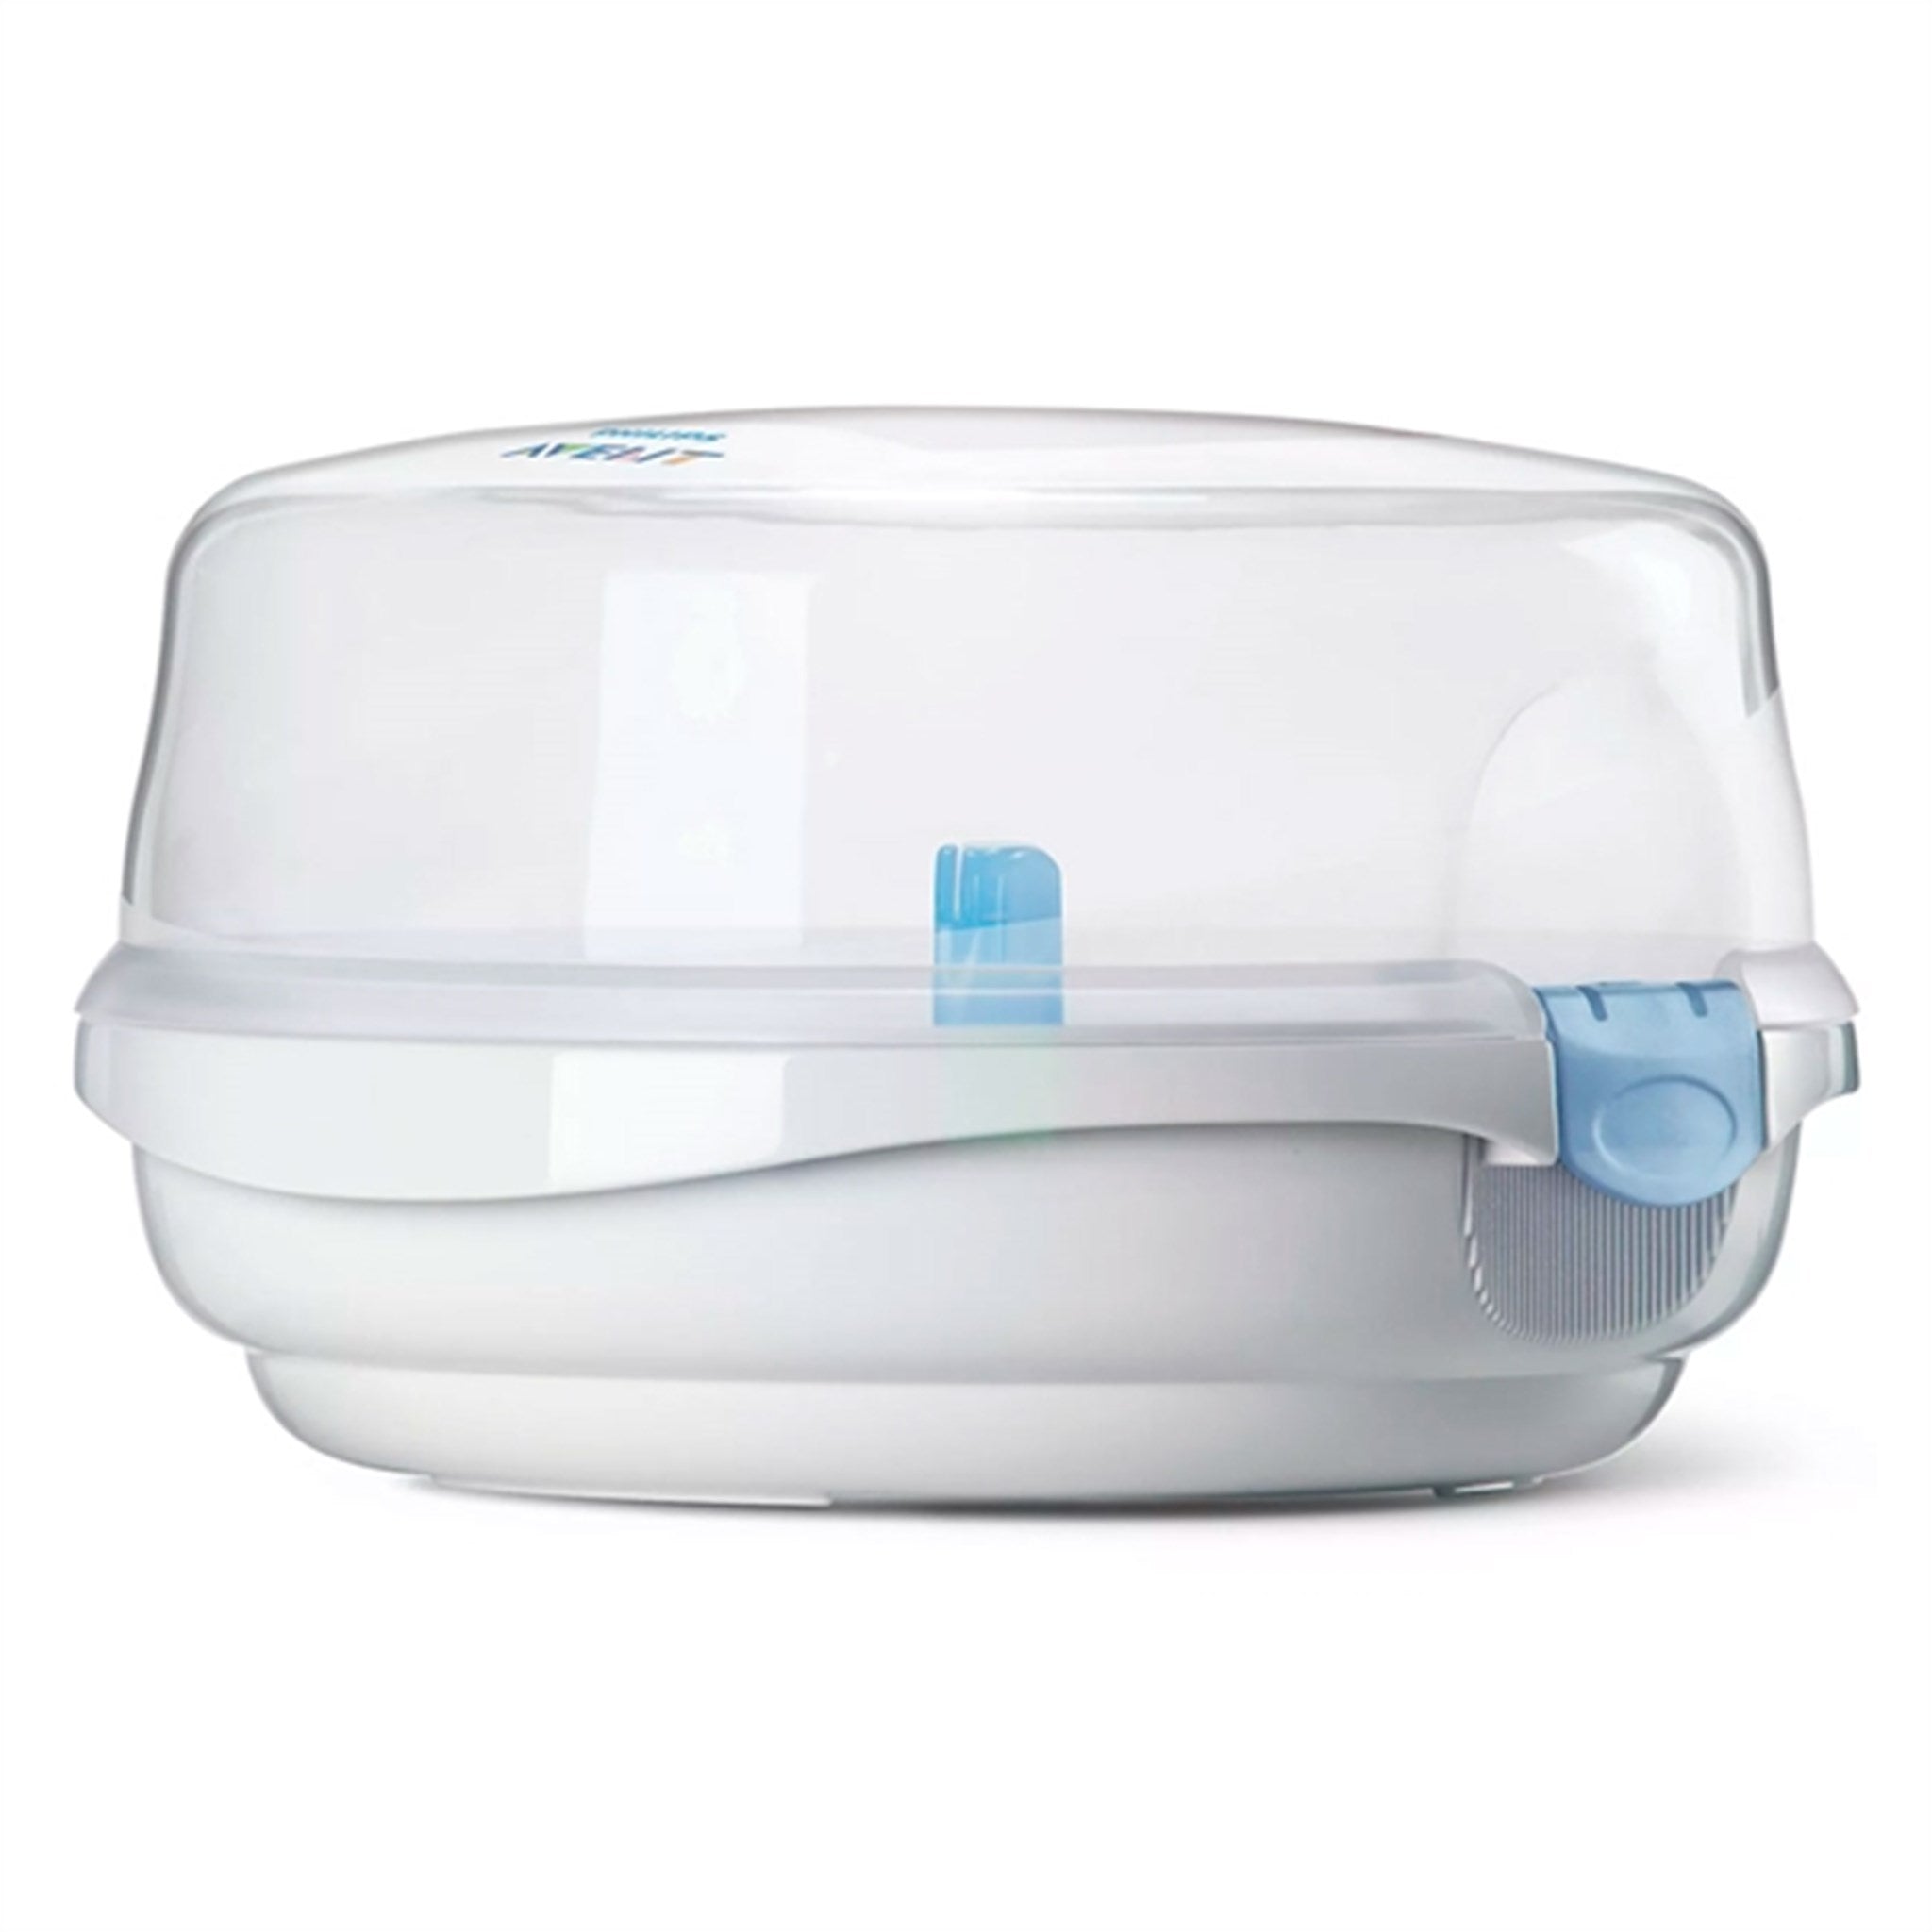 Philips Avent Steam Sterilization For Microwave 4